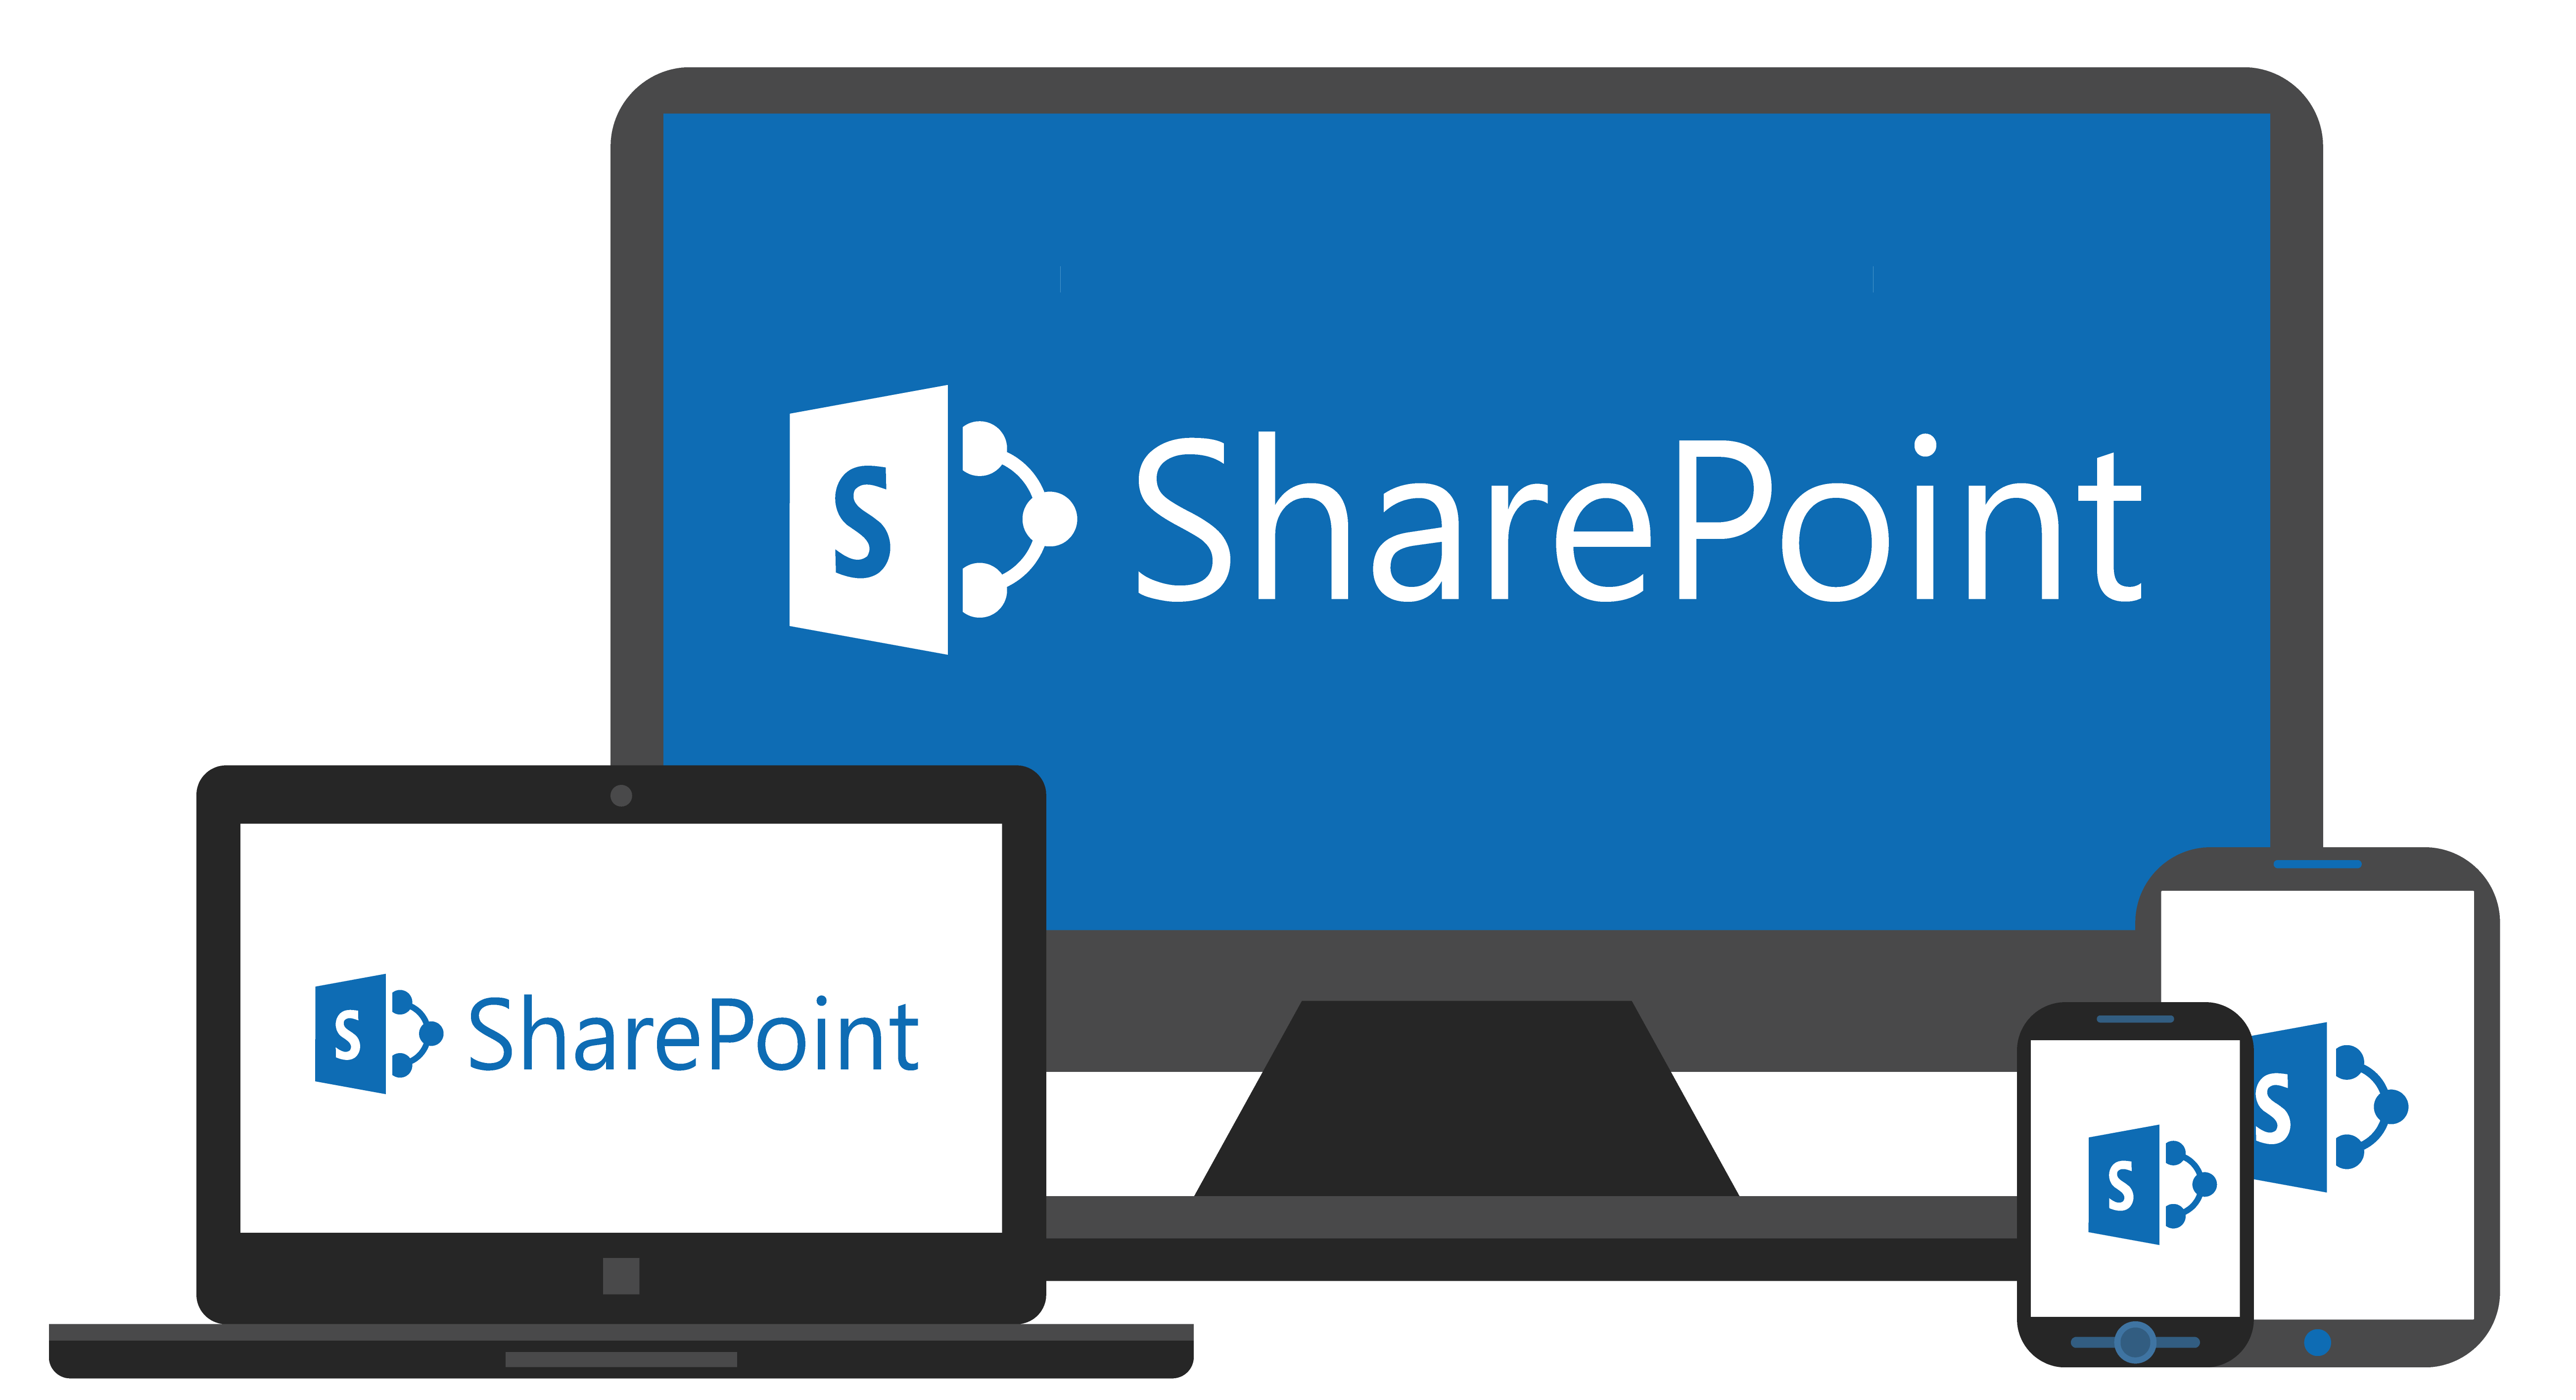 SharePoint’s security features versus OneDrive’s